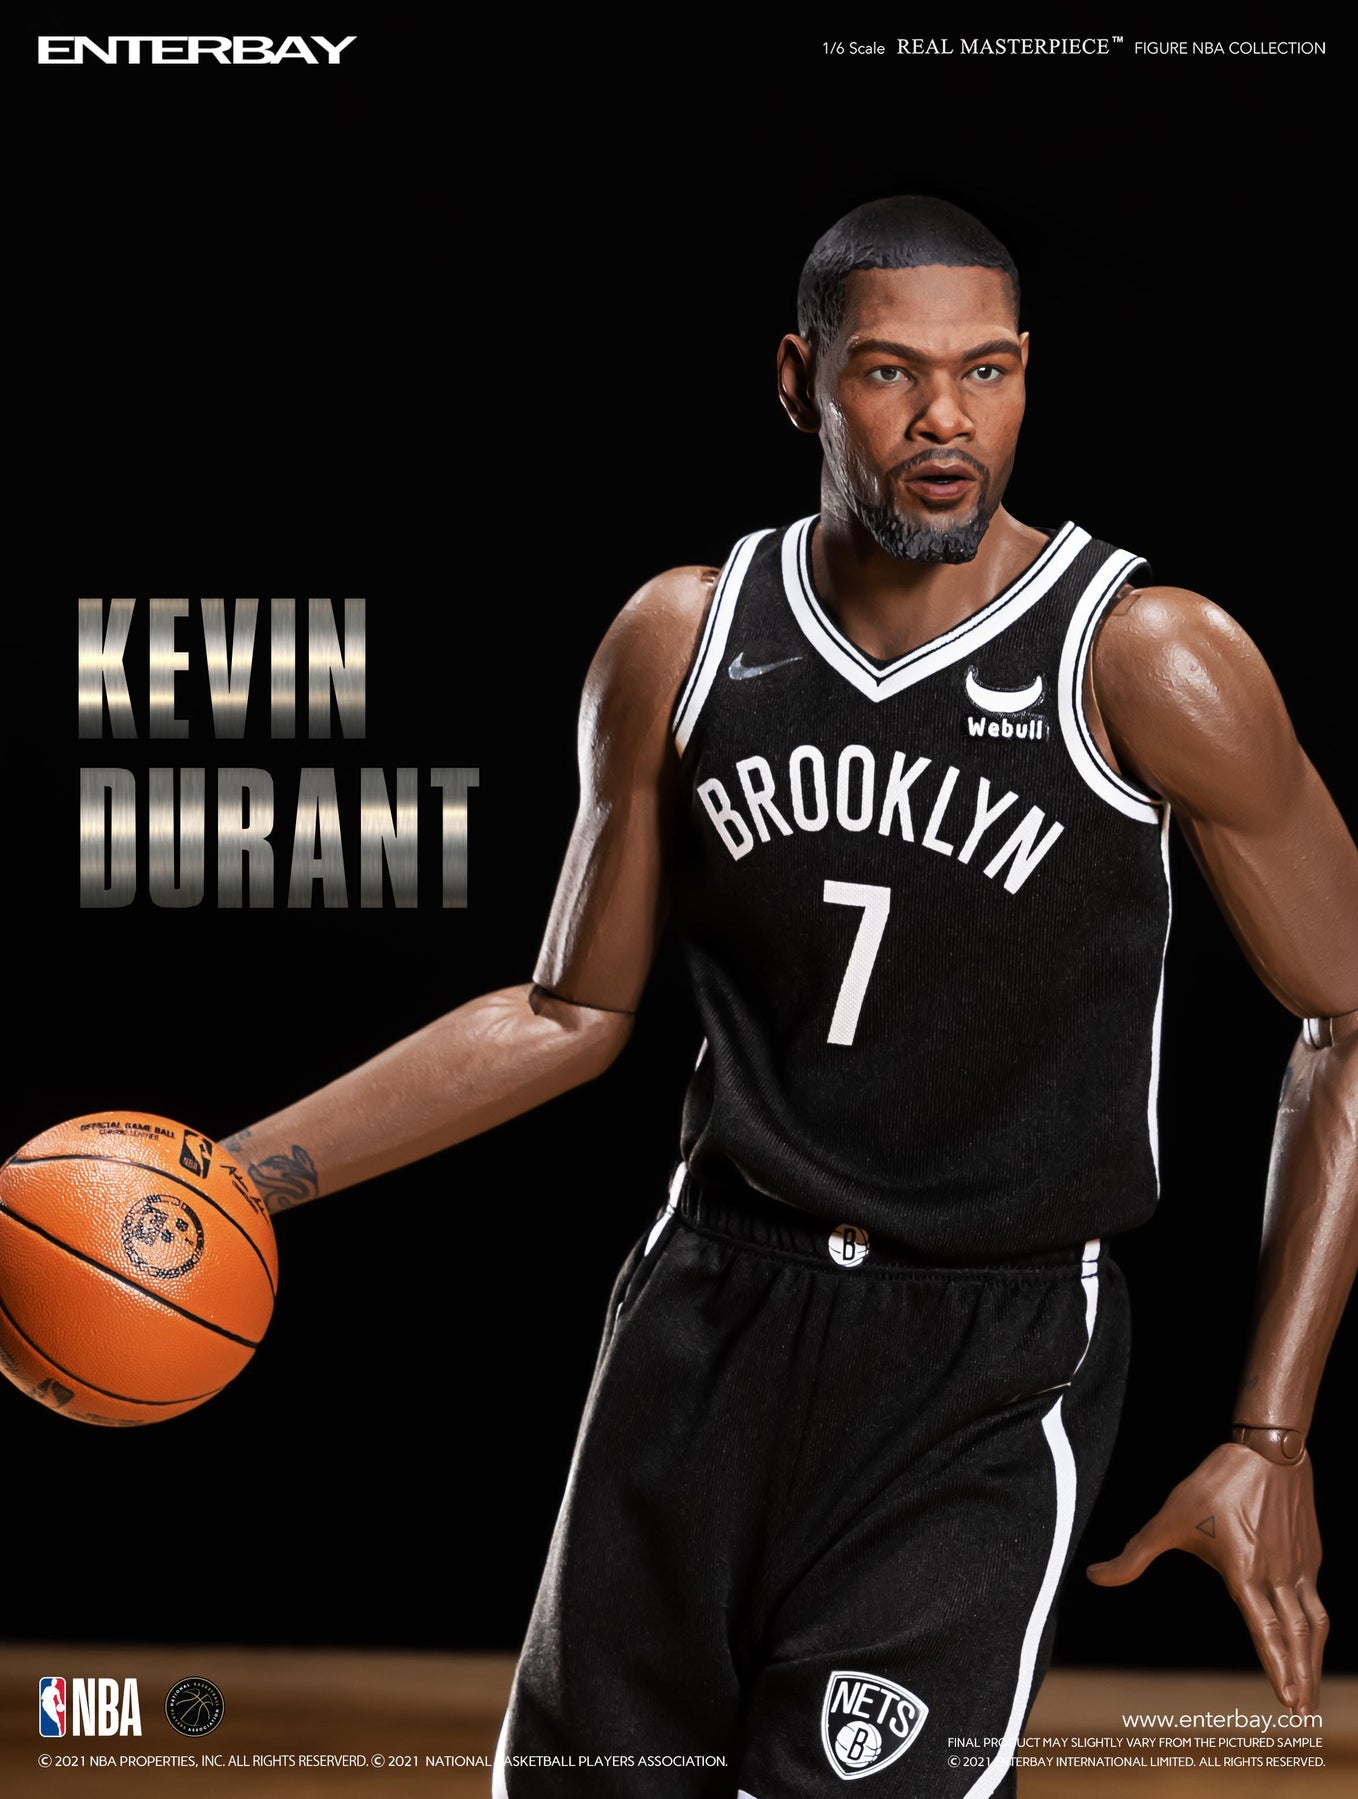 [PREORDER] 1/6 REAL MASTERPIECE NBA COLLECTION: KEVIN DURANT NBA ACTION FIGURE